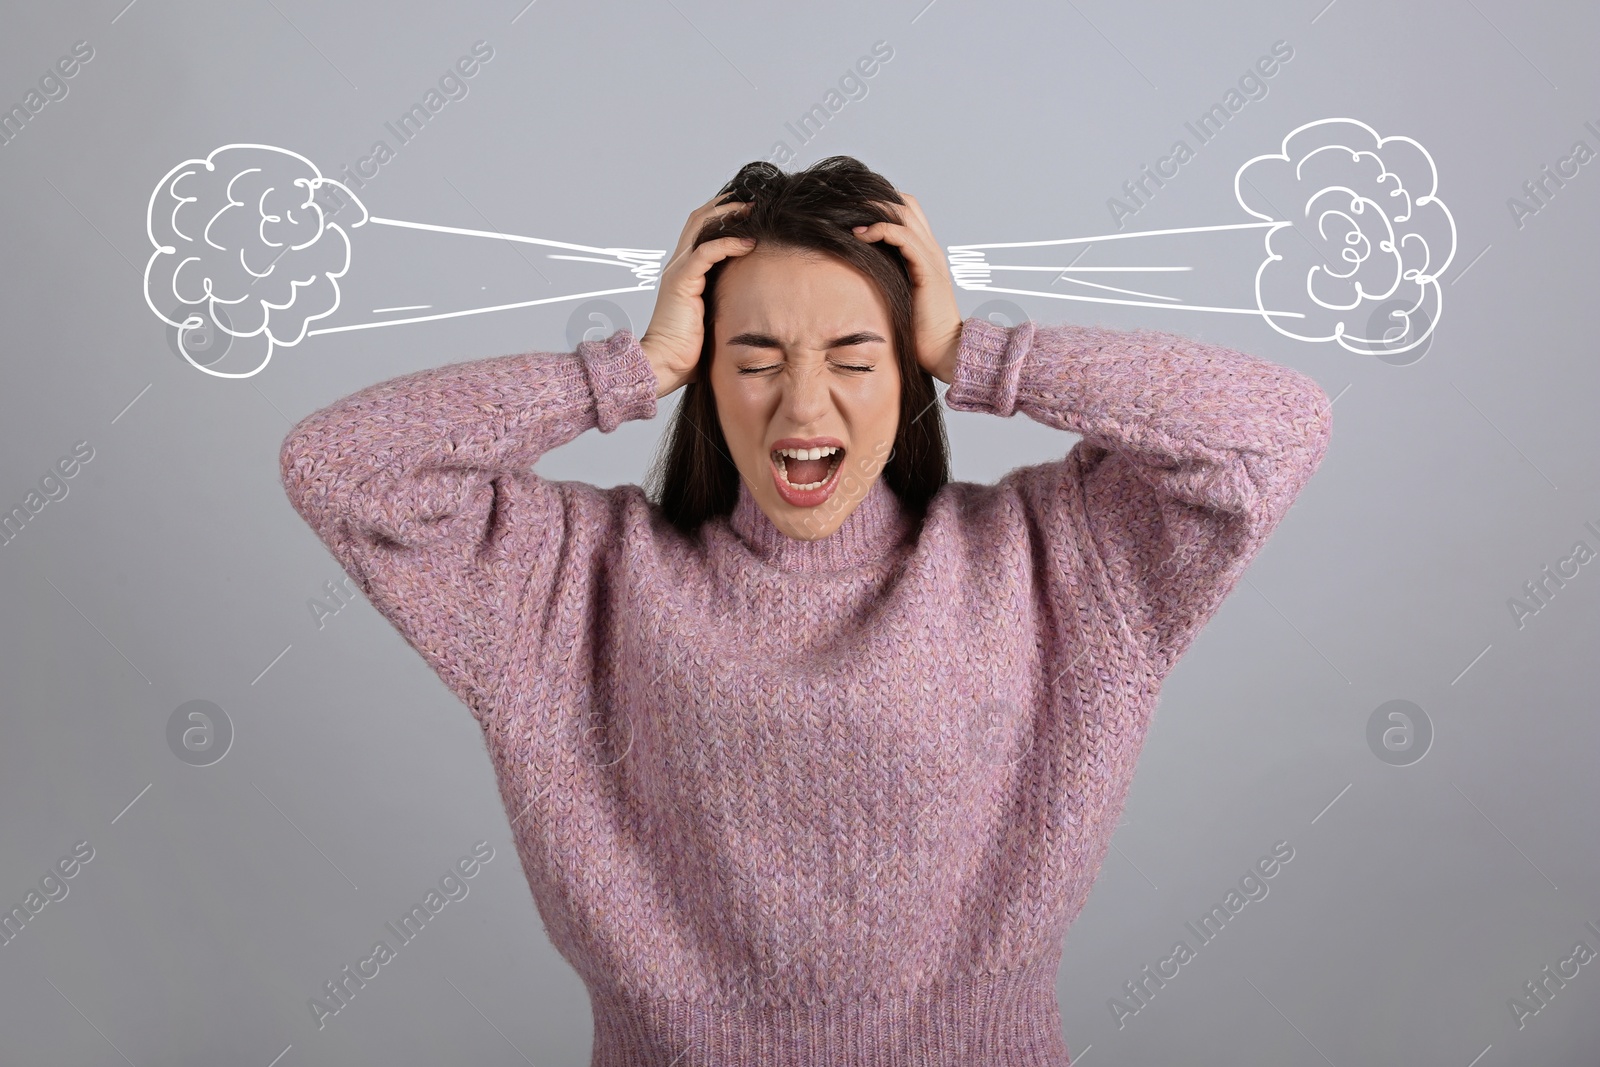 Image of Stressed and upset young woman on light grey background